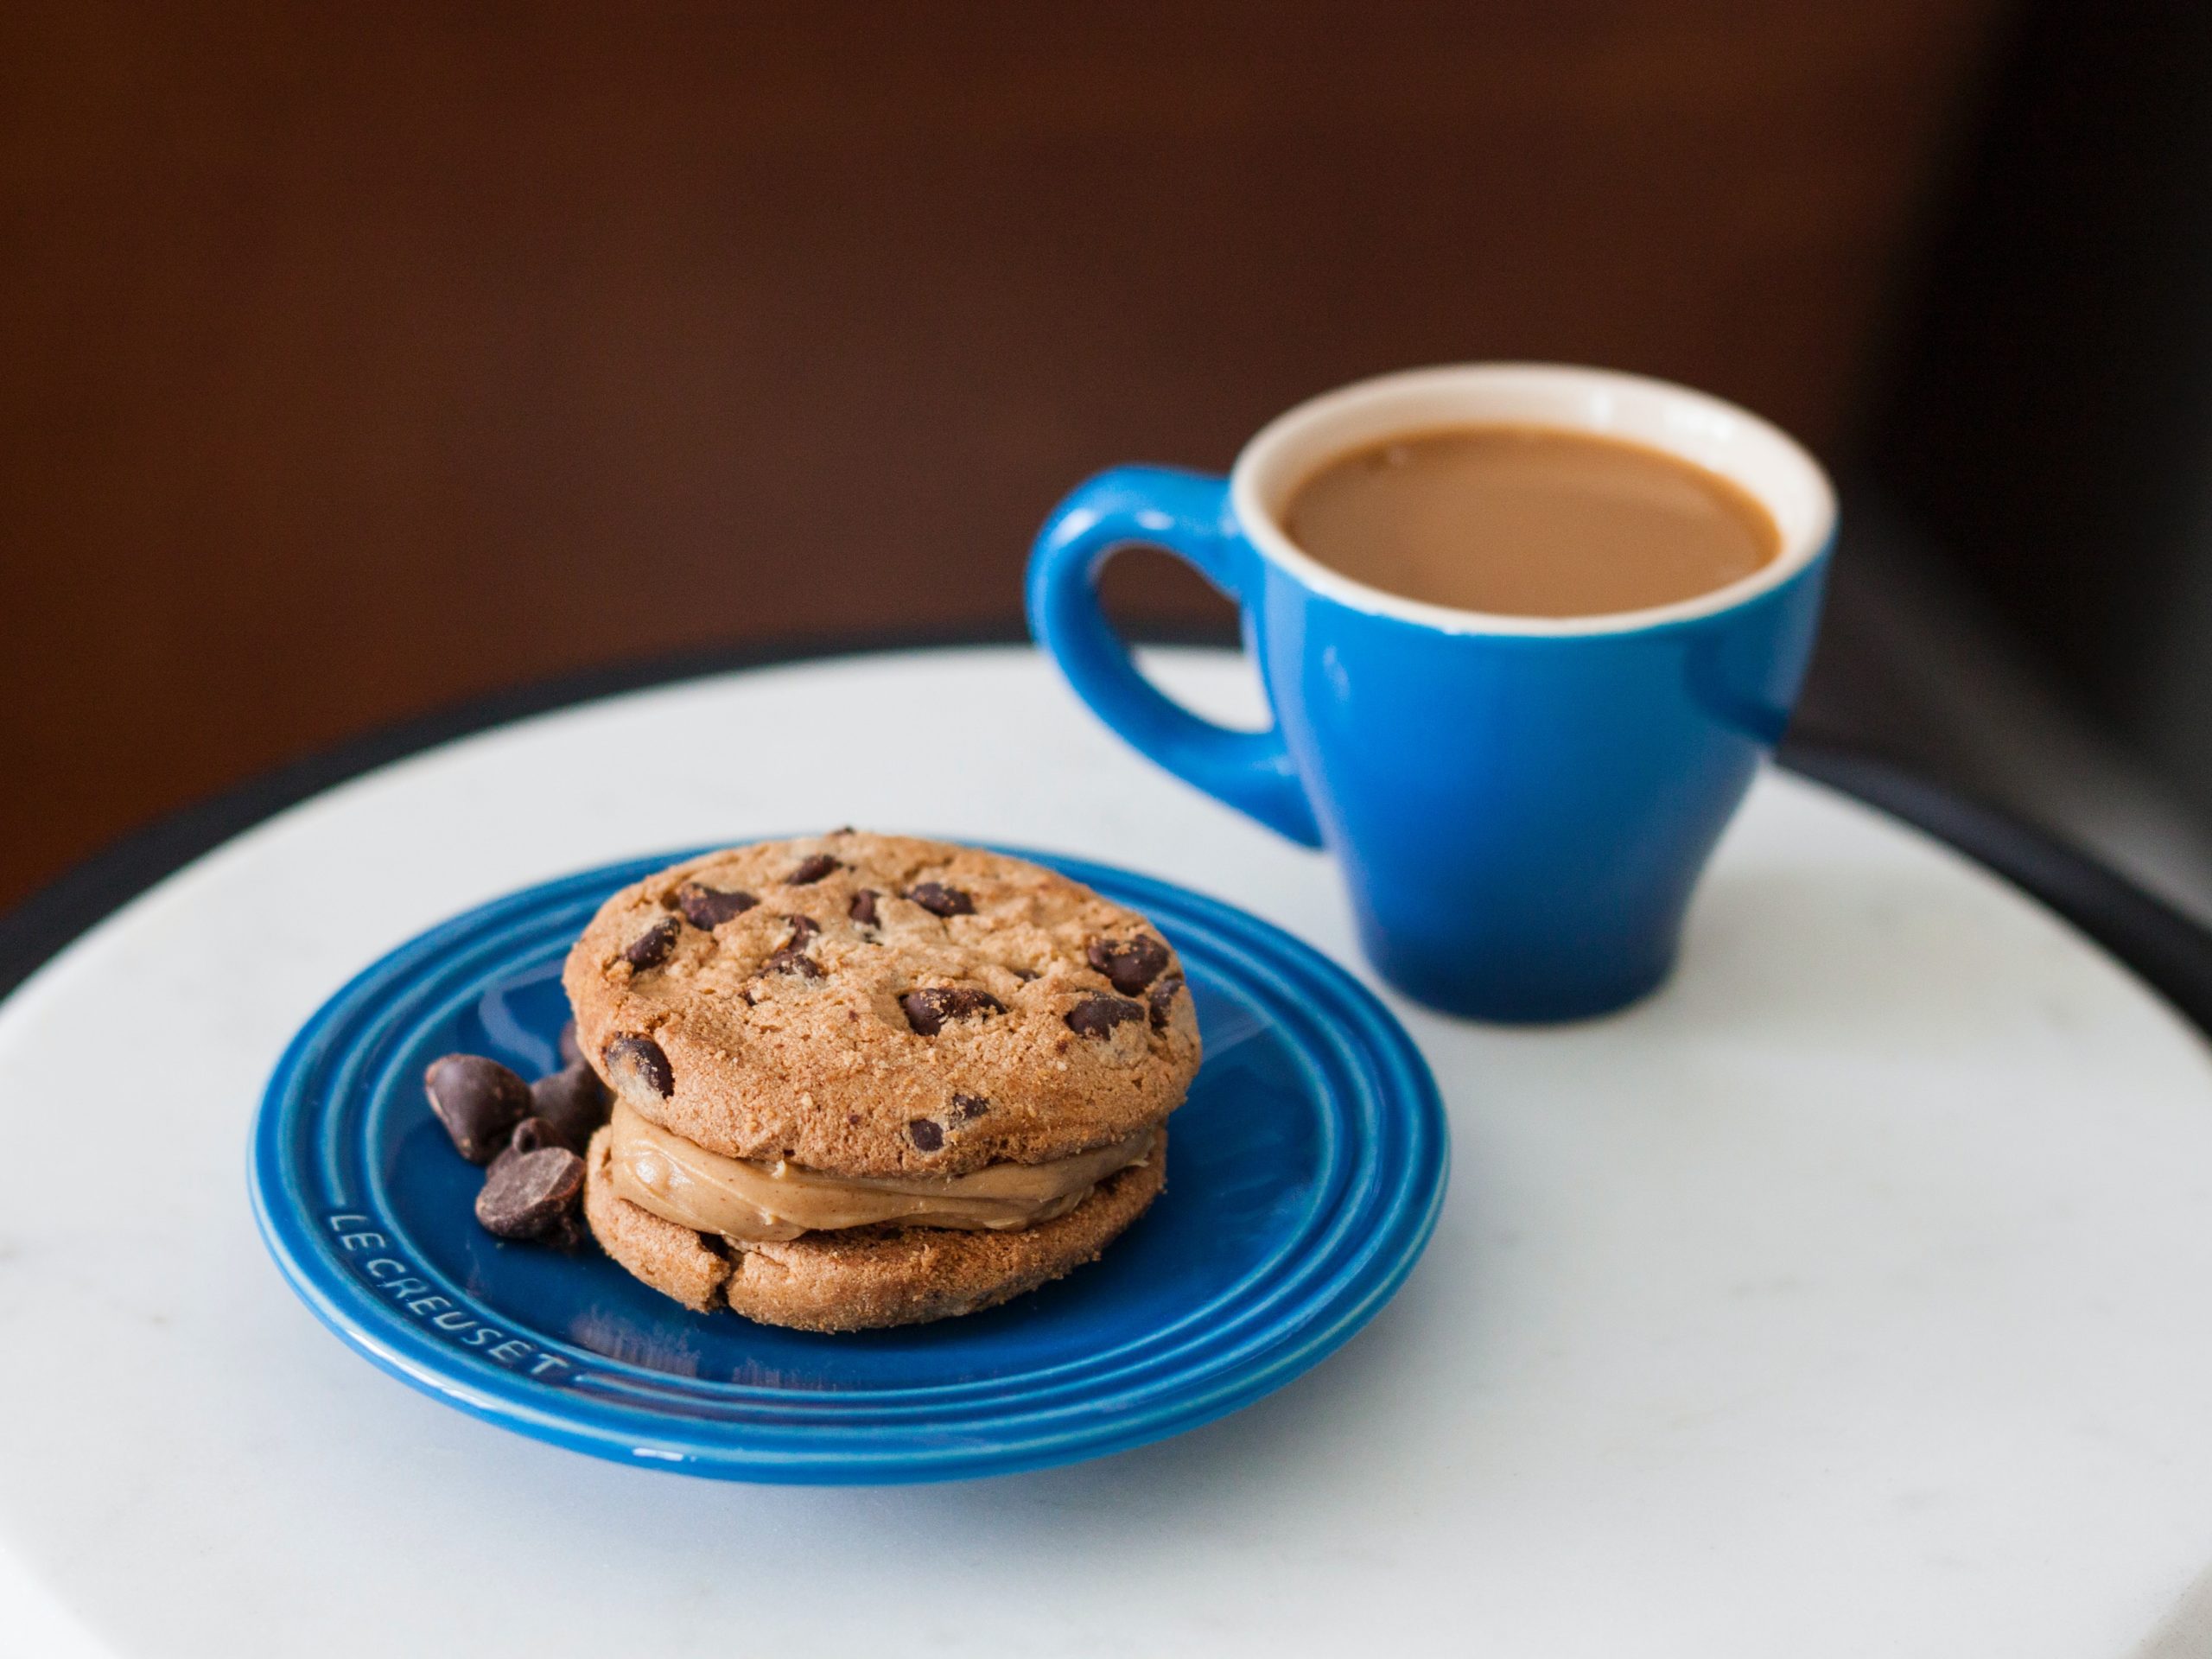 A small blue mug with milky coffee next to a blue plate with chocolate chip cookies.